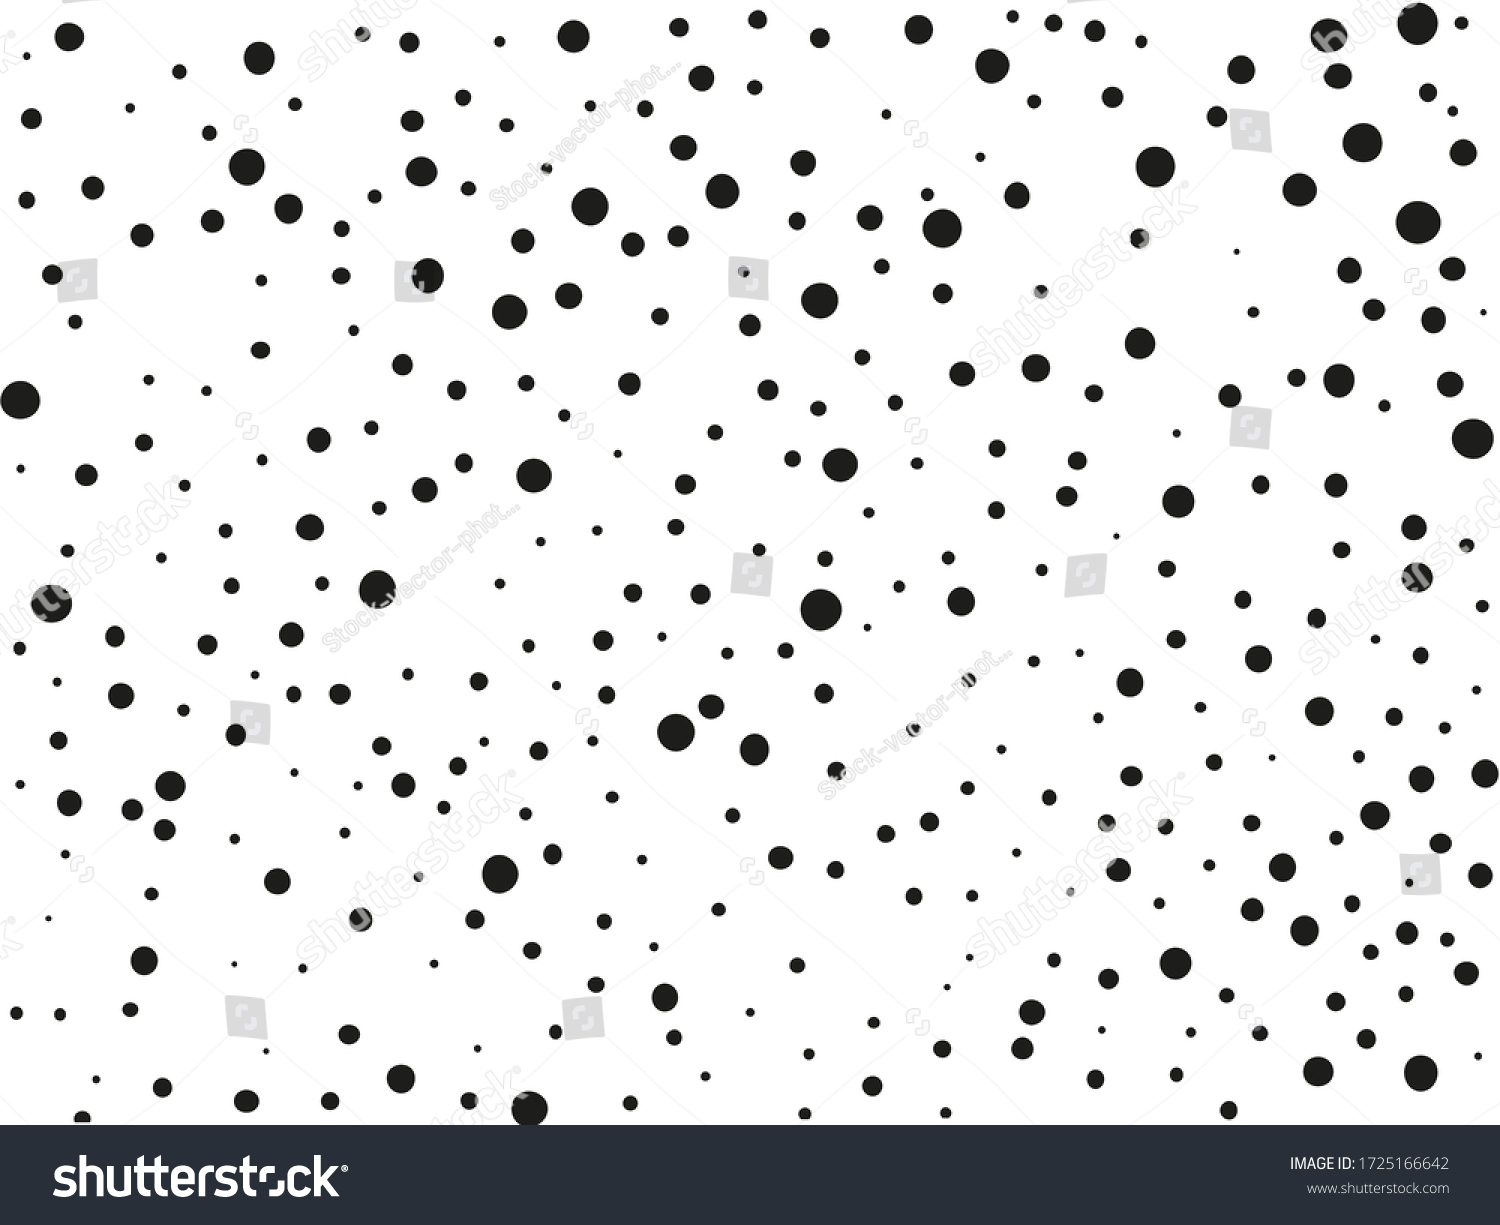 Random halftone. Pointillism style. Background with irregular, chaotic dots, points, circle. Abstract monochrome pattern. Black and white color. Vector illustration  #1725166642